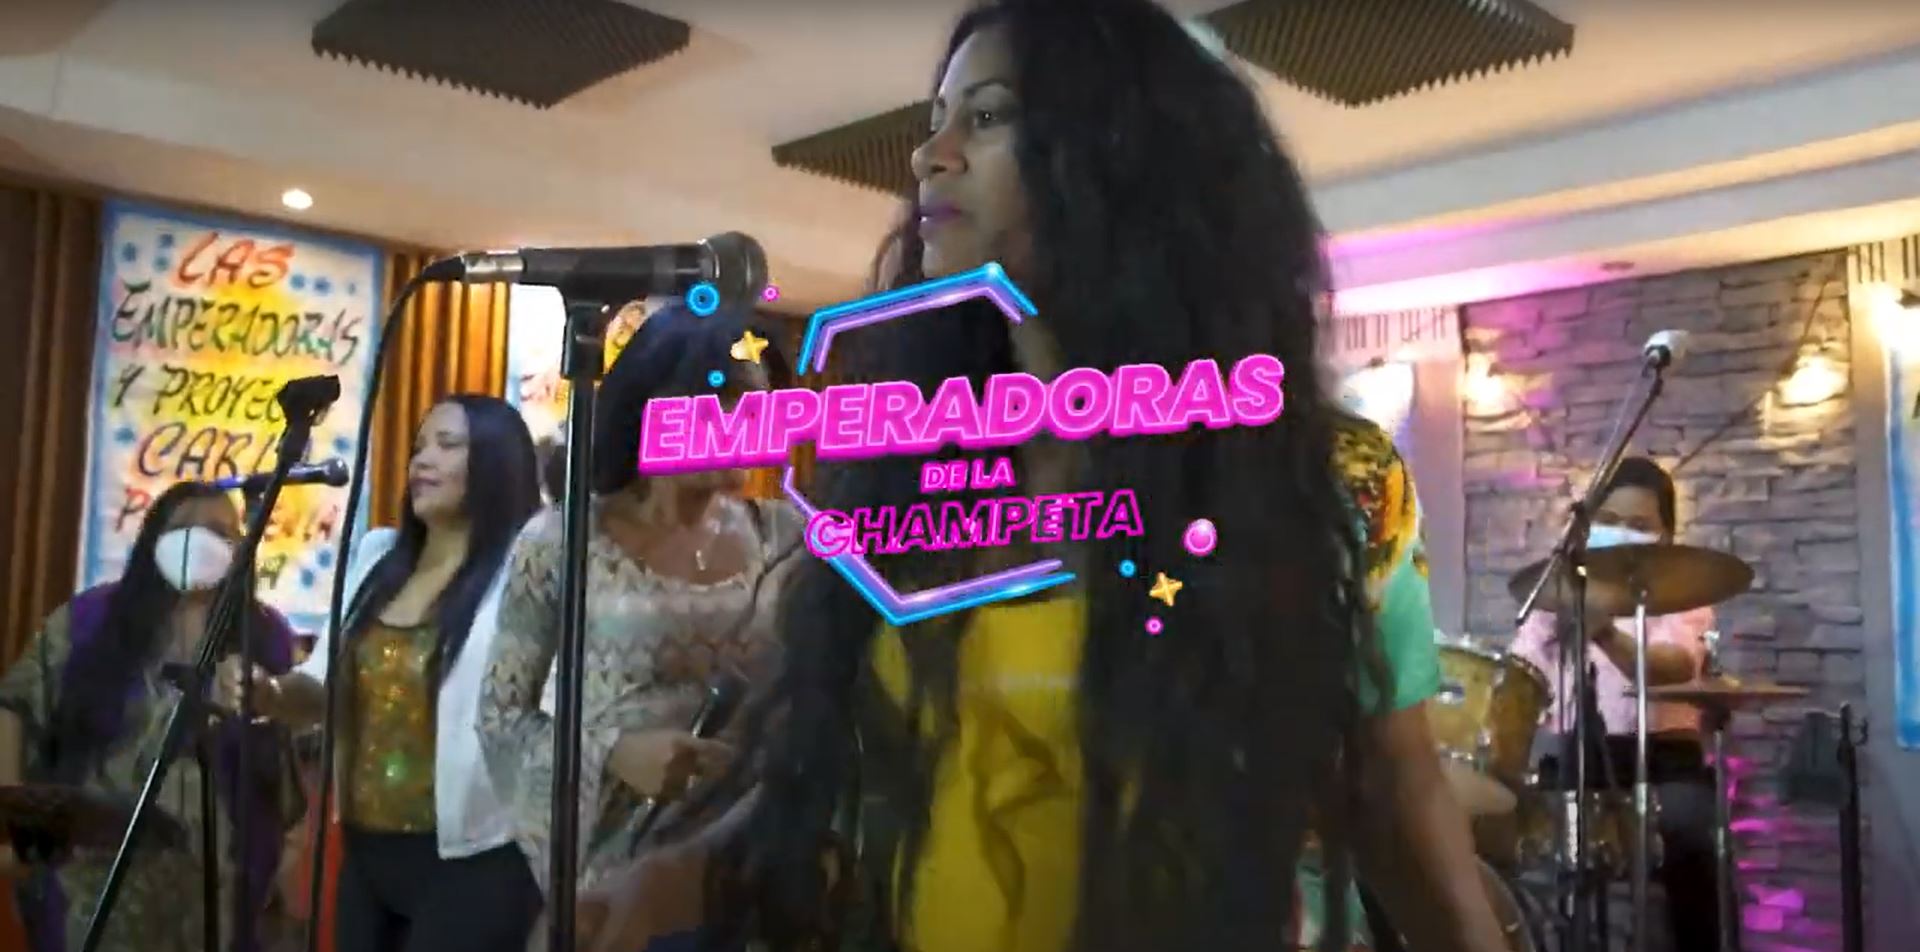 Video of a song by Las Emperadoras, a female champeta group from Cartagena. 